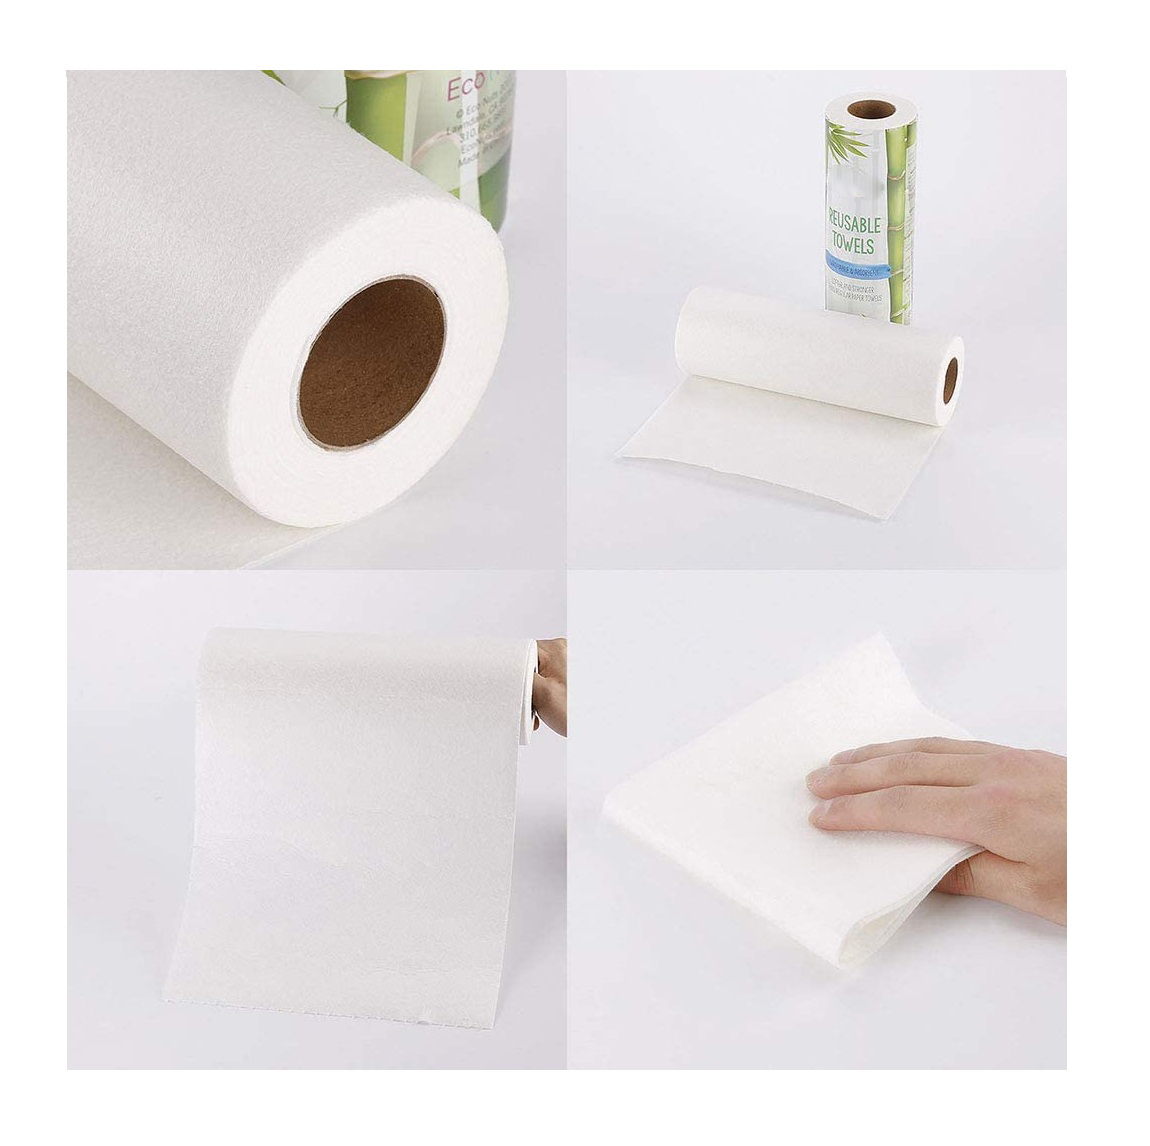 Bamboo Fiber Cleaning Rags